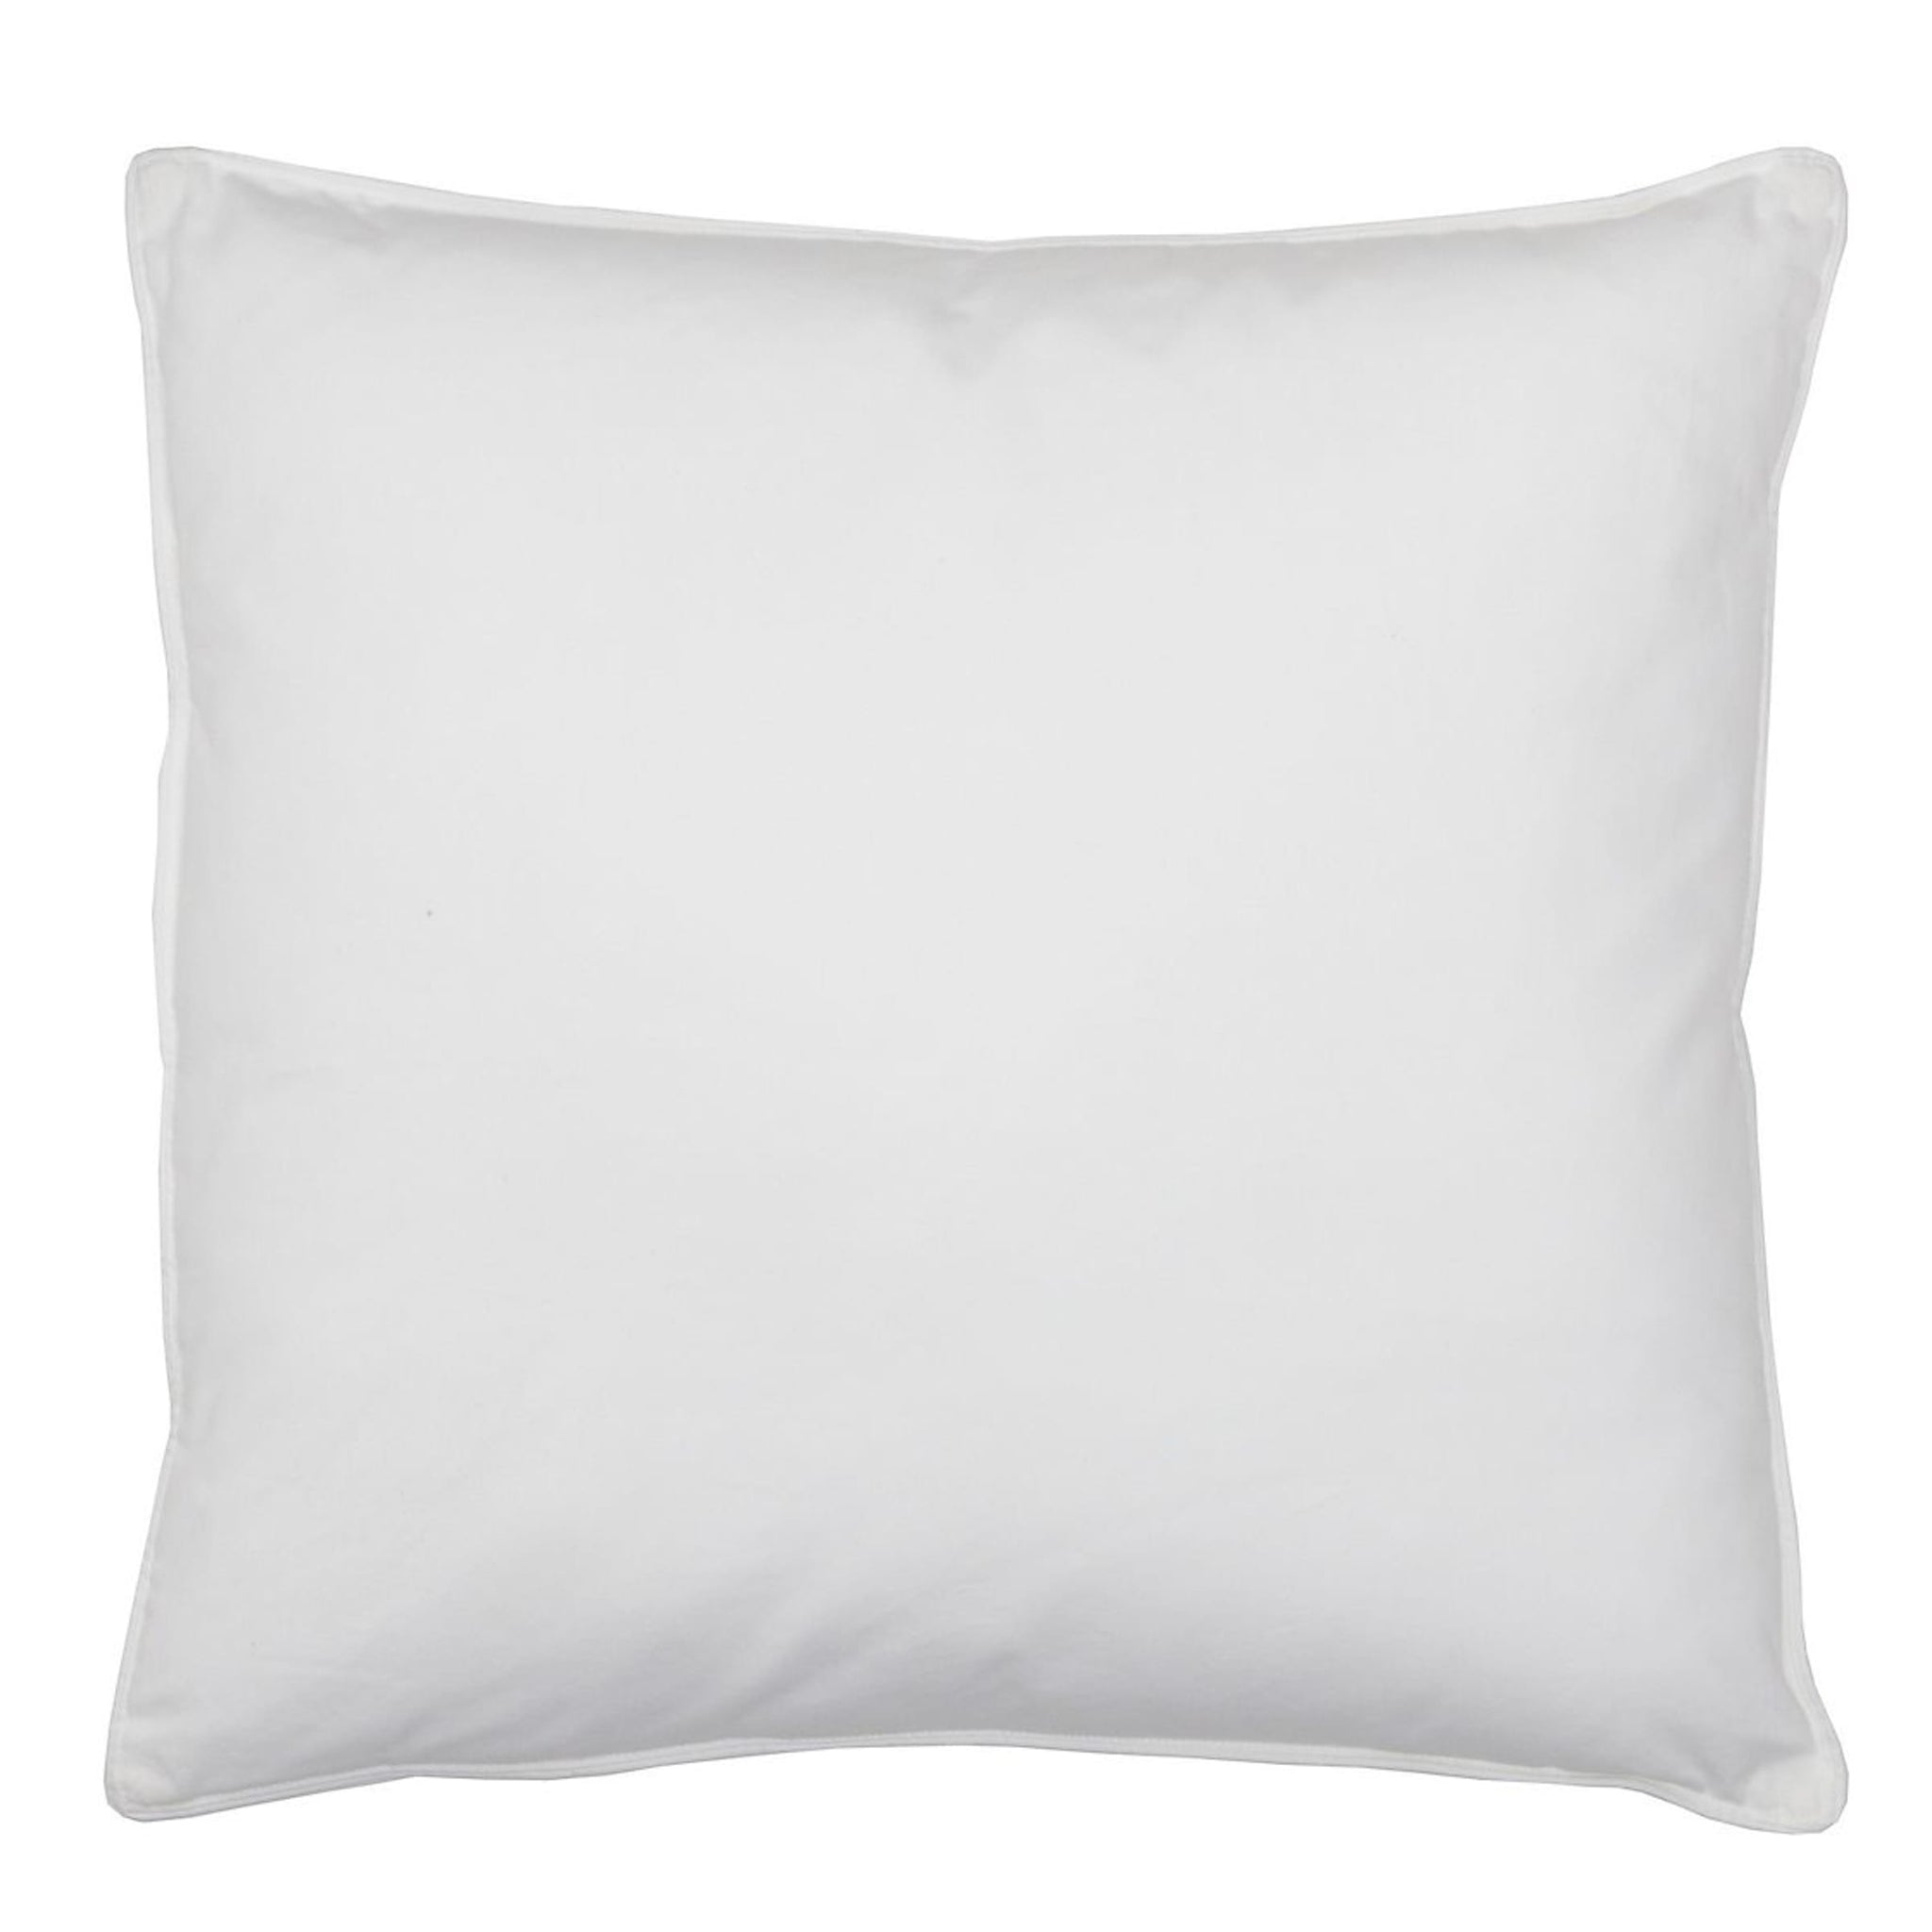 Feather and Down Firm Density Square Pillow Inserts